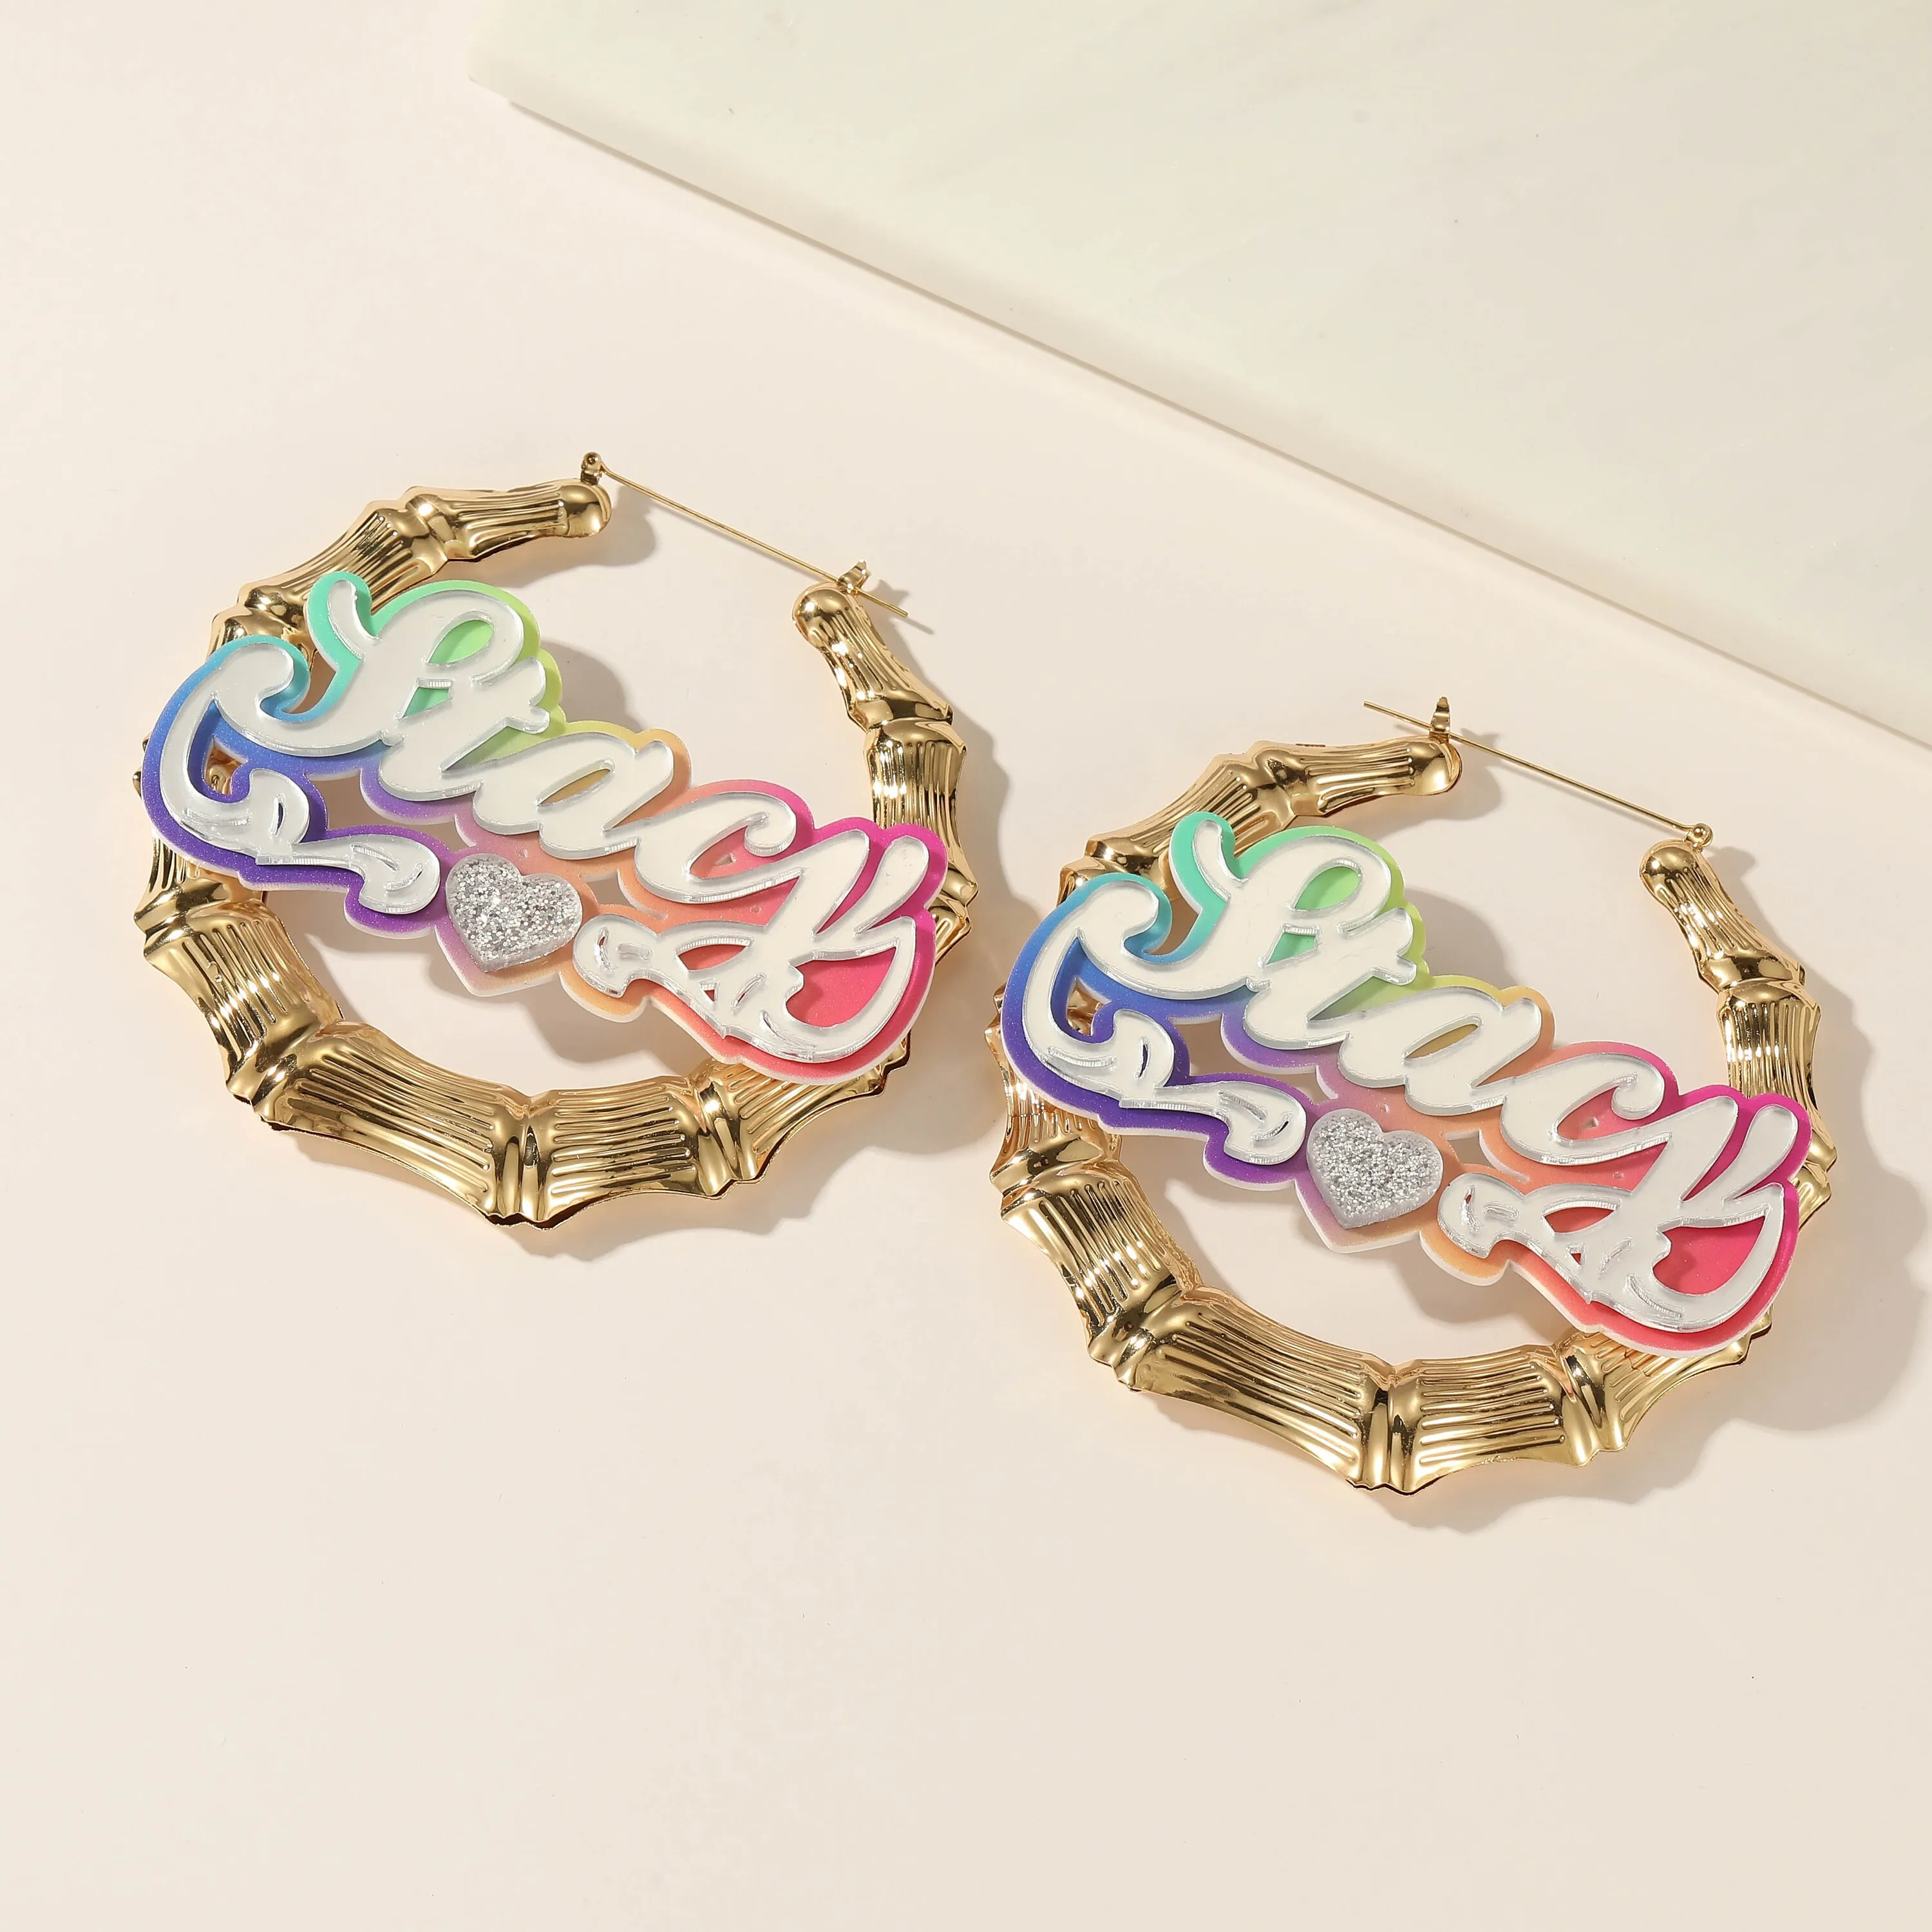 Acrylic Custom Name Earrings Stainless Bamboo Colorful Earrings Female Personality Acrylic Earrings For Women Girls Jewelry Gift jewelry organizer box storage large size transparent acrylic display case hanging necklace earrings jewelry boxes stray kids